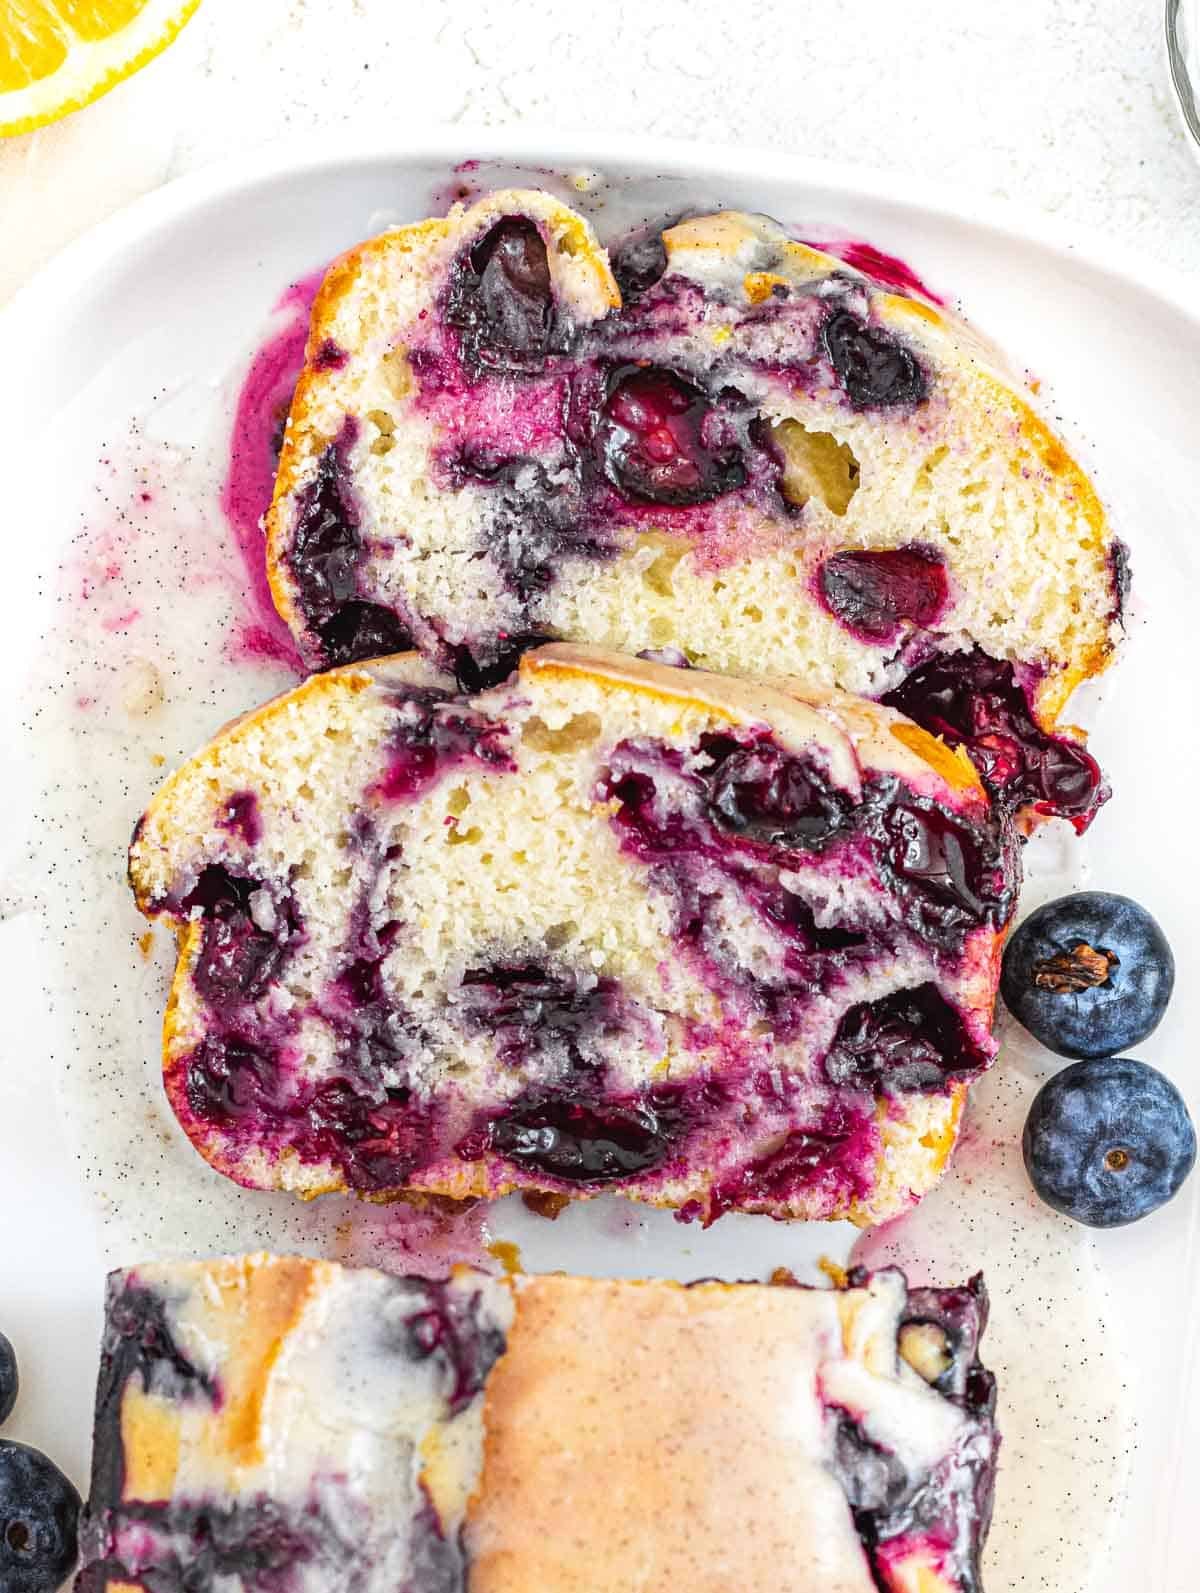 pound cake slices with blueberries